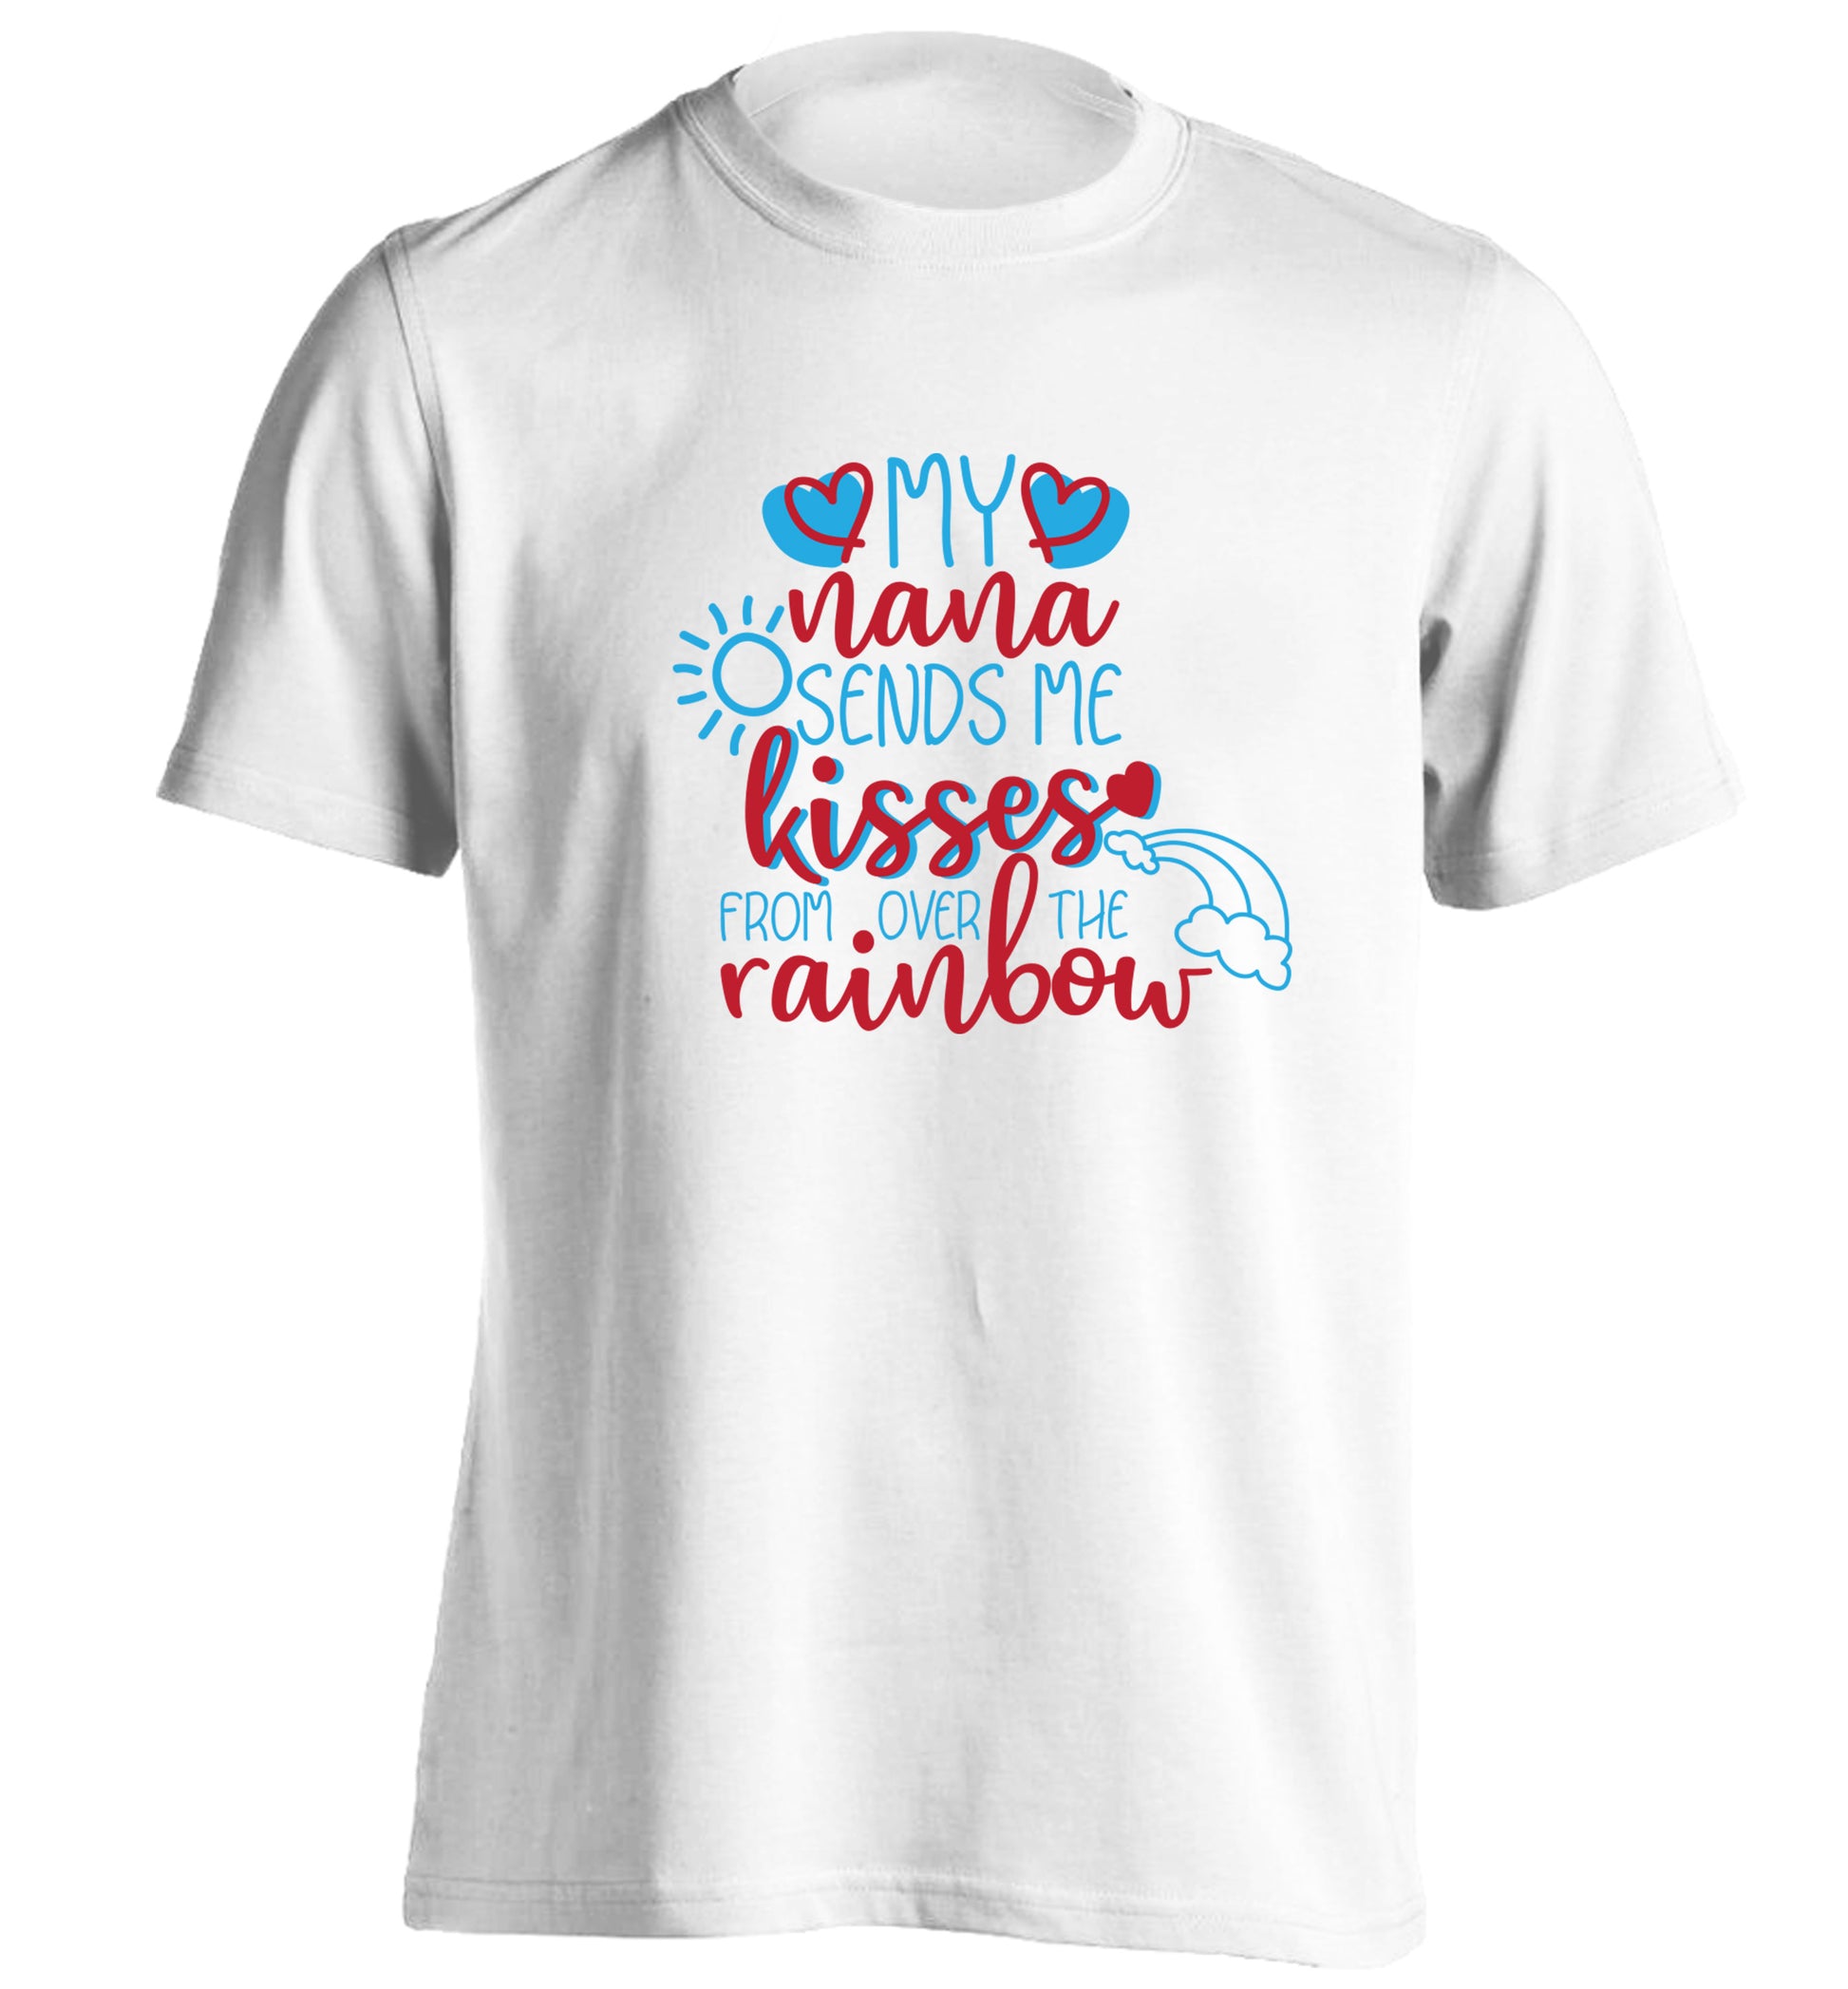 My nana sends me kisses from over the rainbow adults unisex white Tshirt 2XL